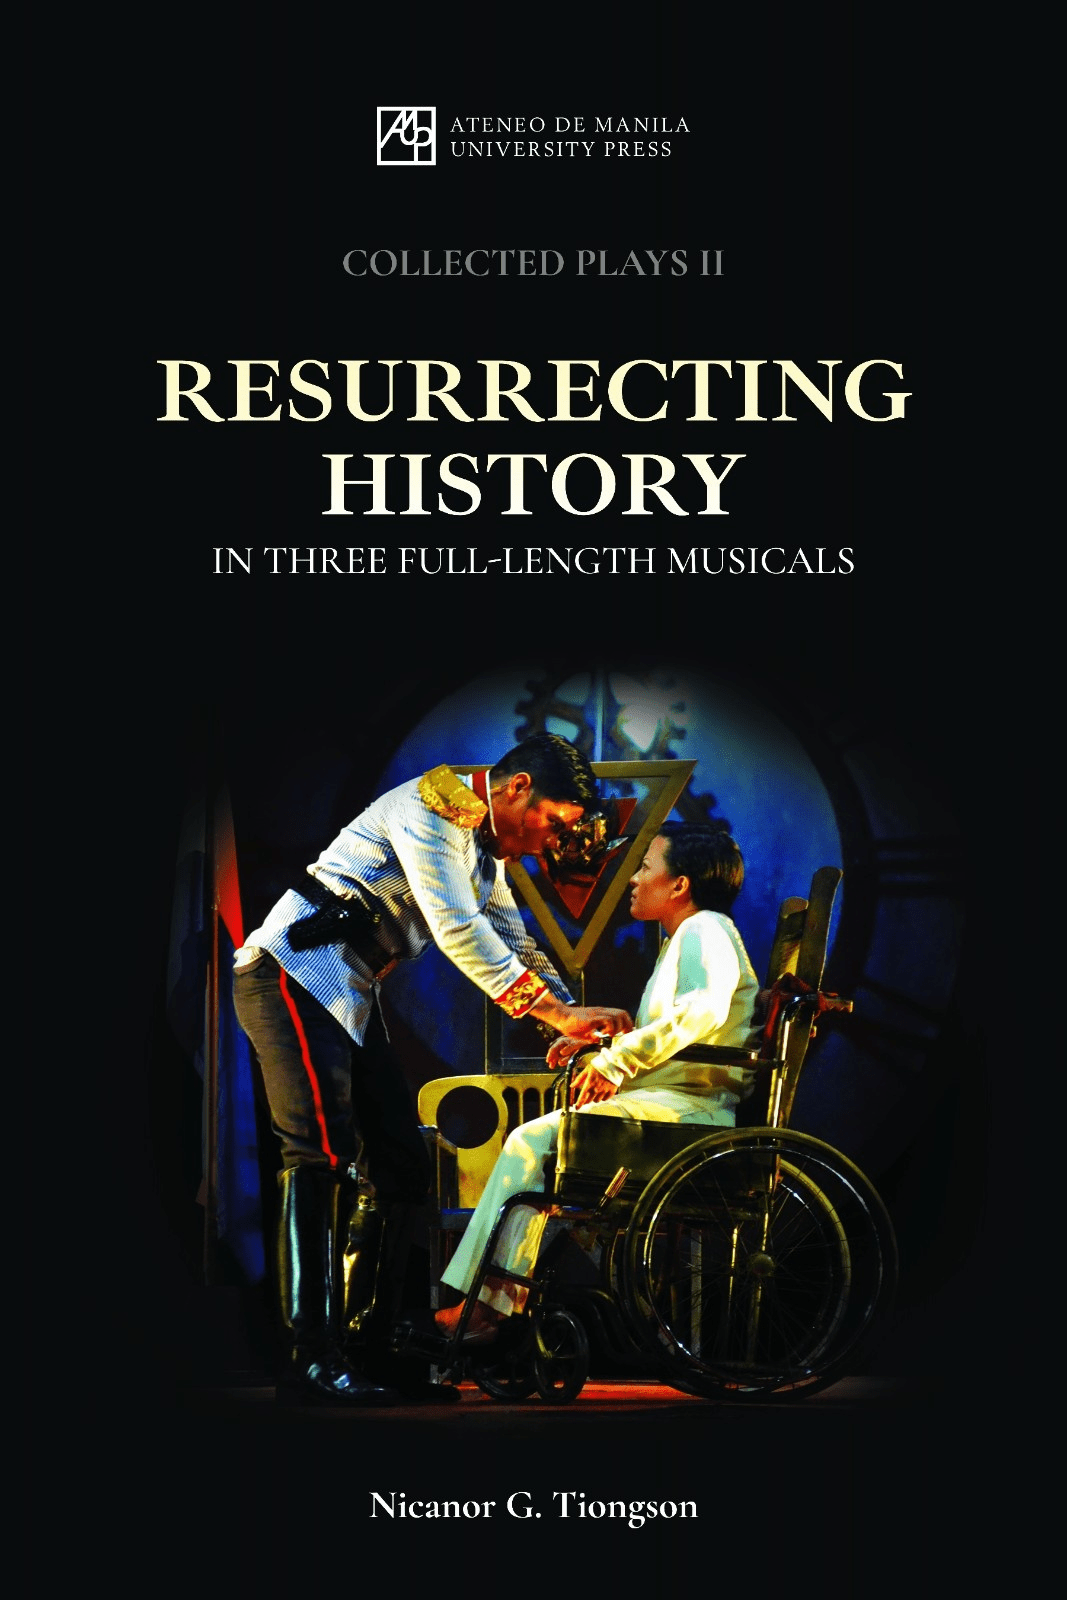 Front Cover of Collected Plays II: Resurrecting History